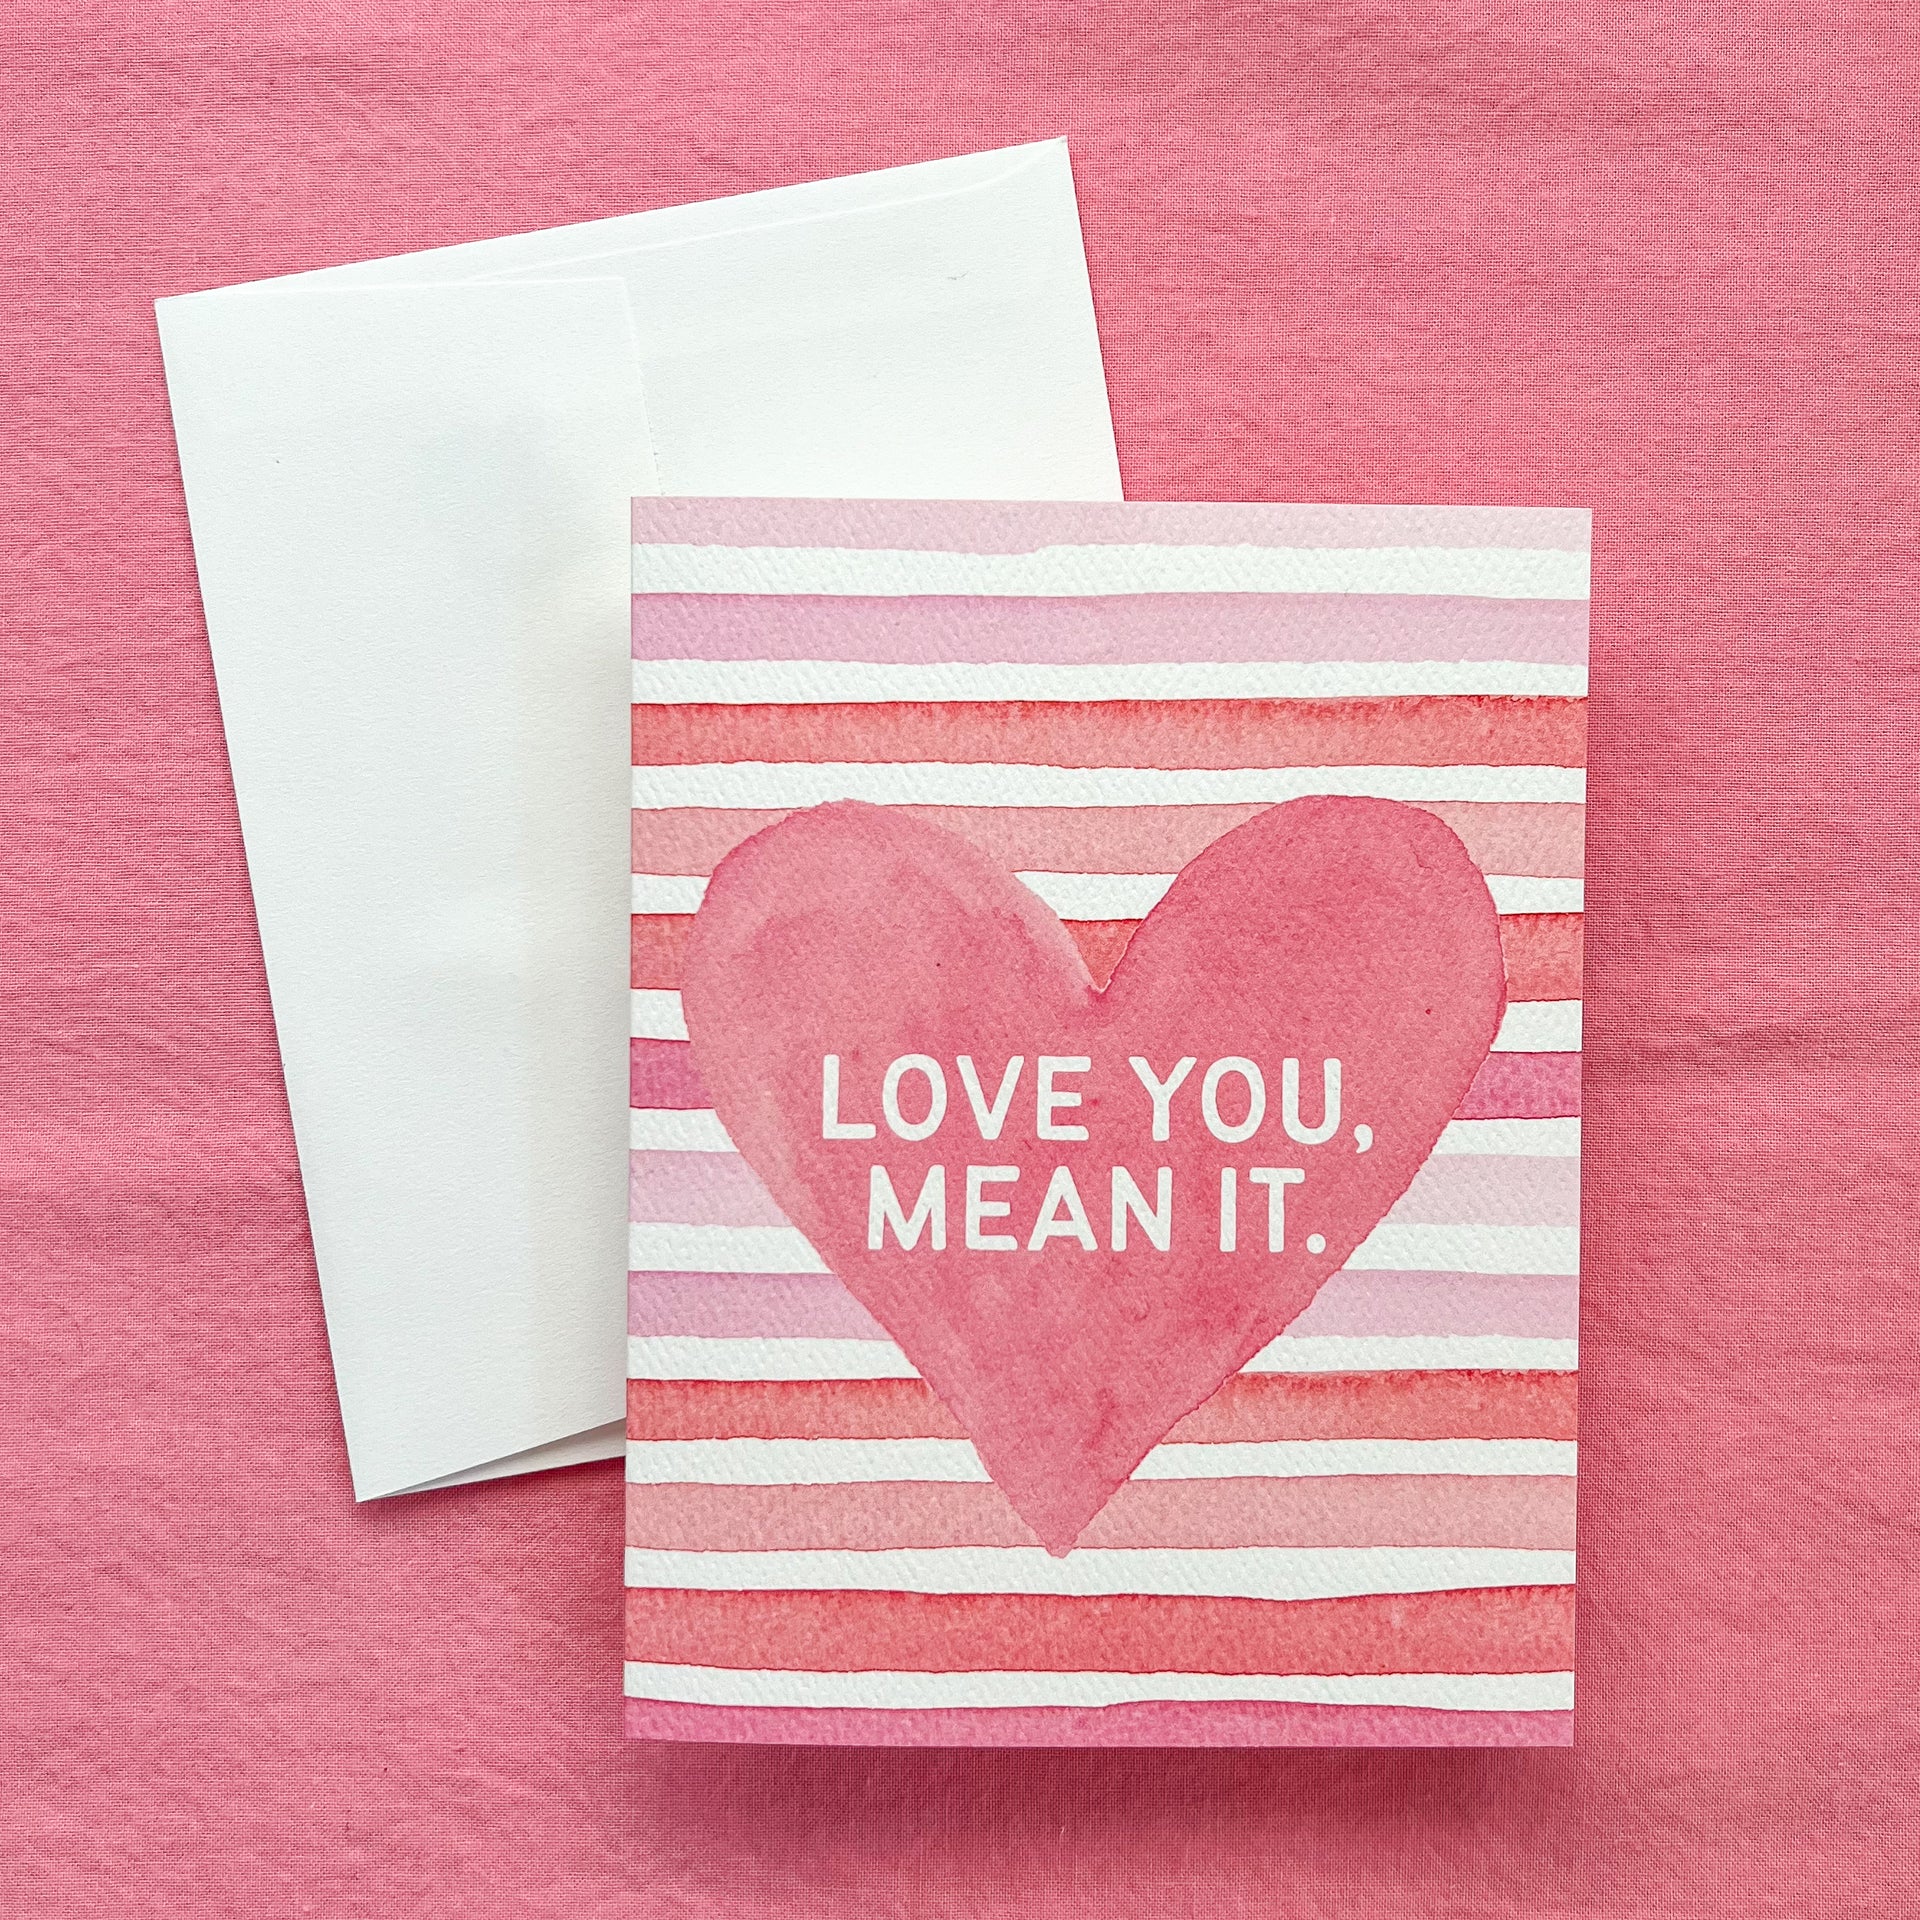 Love You, Mean It Greeting Card